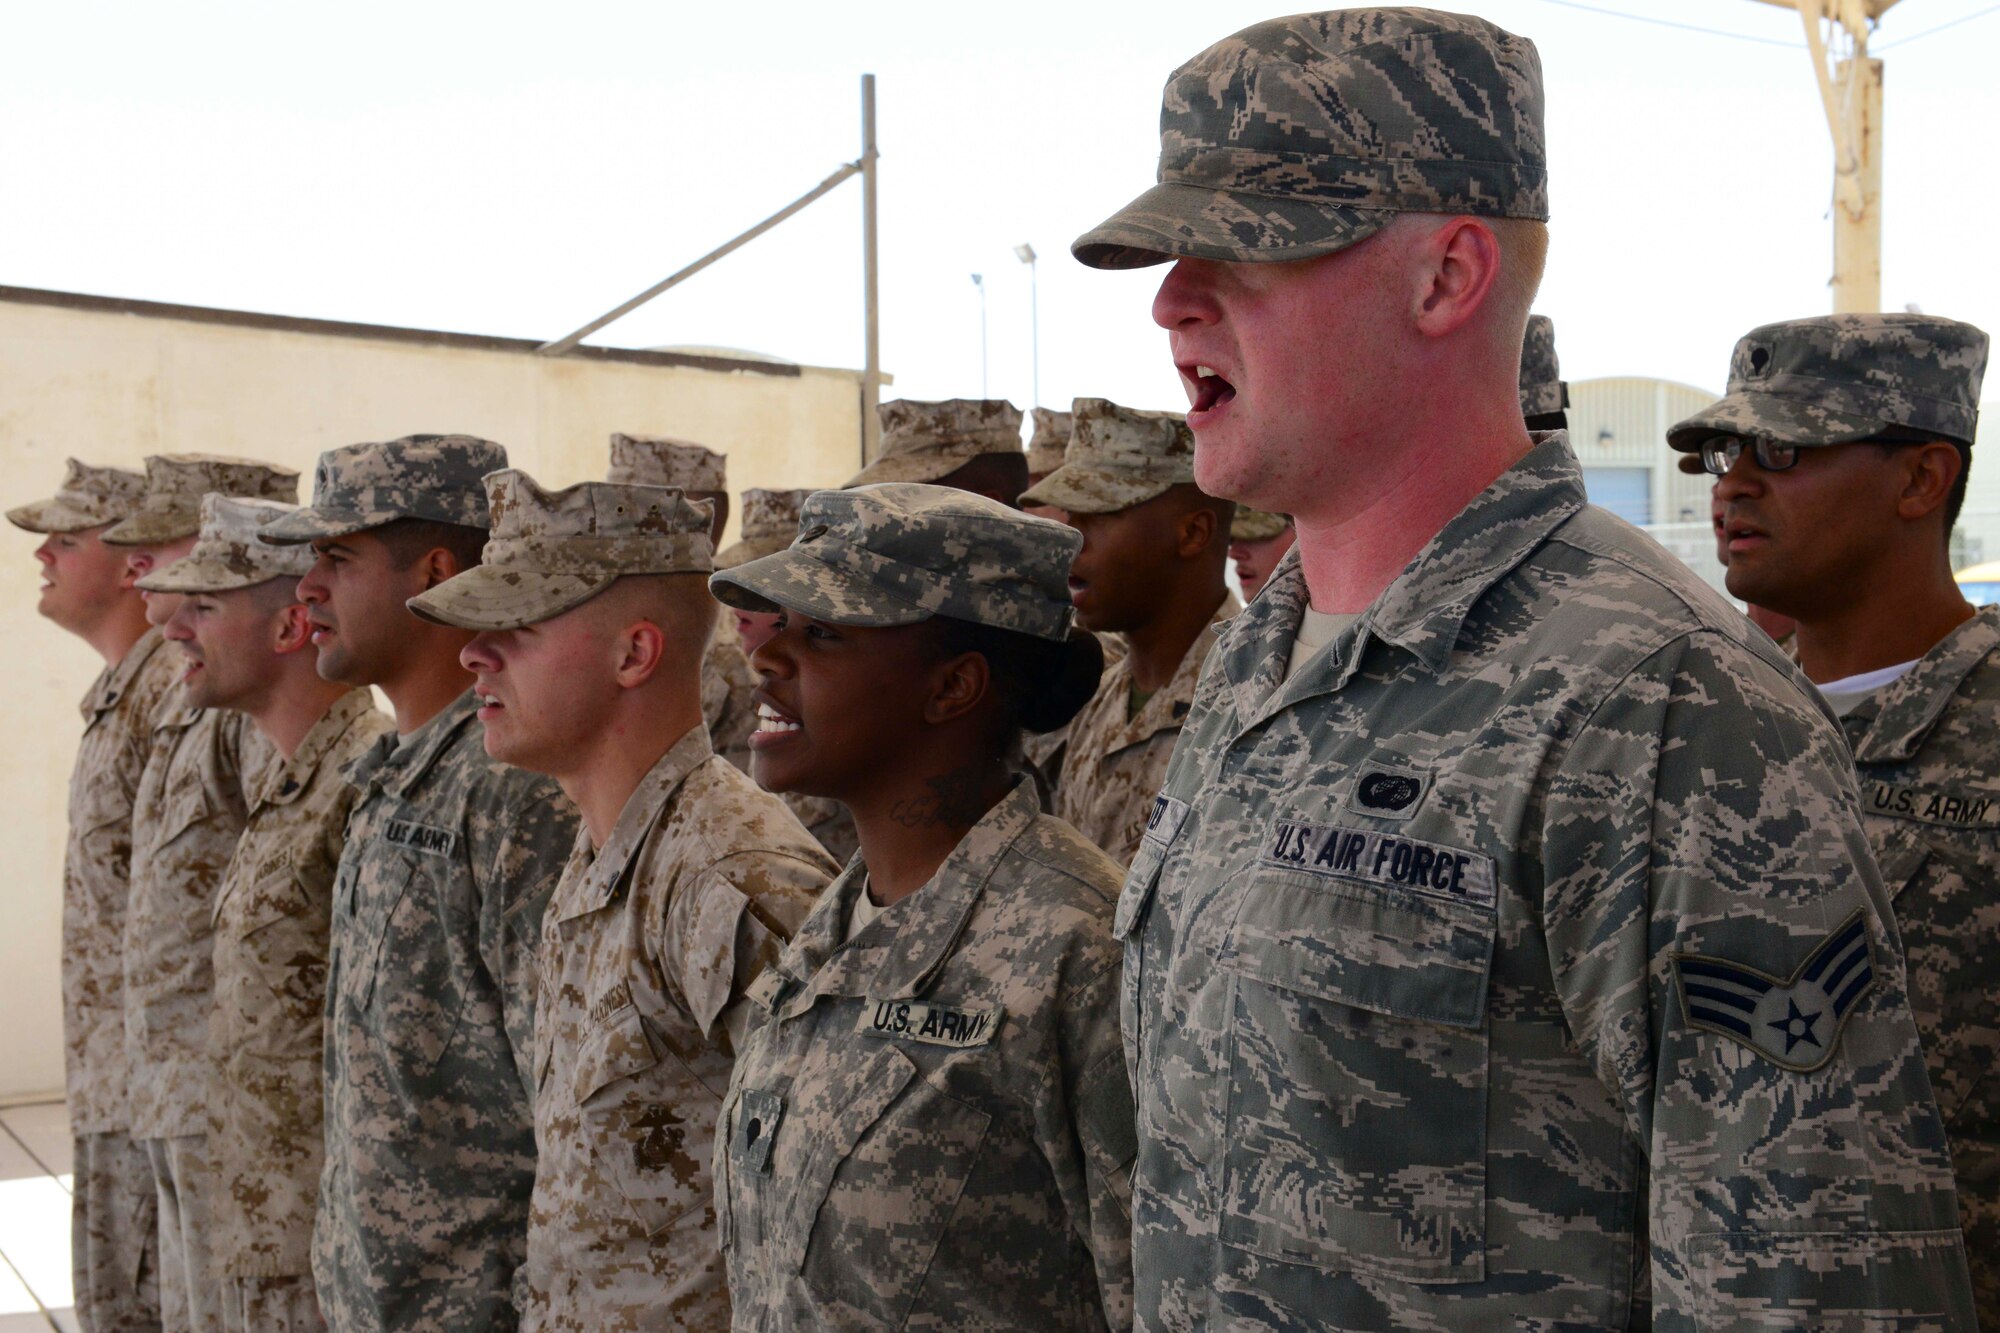 Senior Airman Luke Meister and other service members in a Corporal’s Course recite the Marine NCO creed June 16, 2014, at Al Udeid Air Base, Qatar. The service members were part of a 15-day Corporal’s Course designed to prepare them for leadership as they progress to the next rank. Meister is a 379th Expeditionary Contracting Squadron contracting officer. (U.S. Air Force photo/Staff Sgt. Ciara Wymbs) 